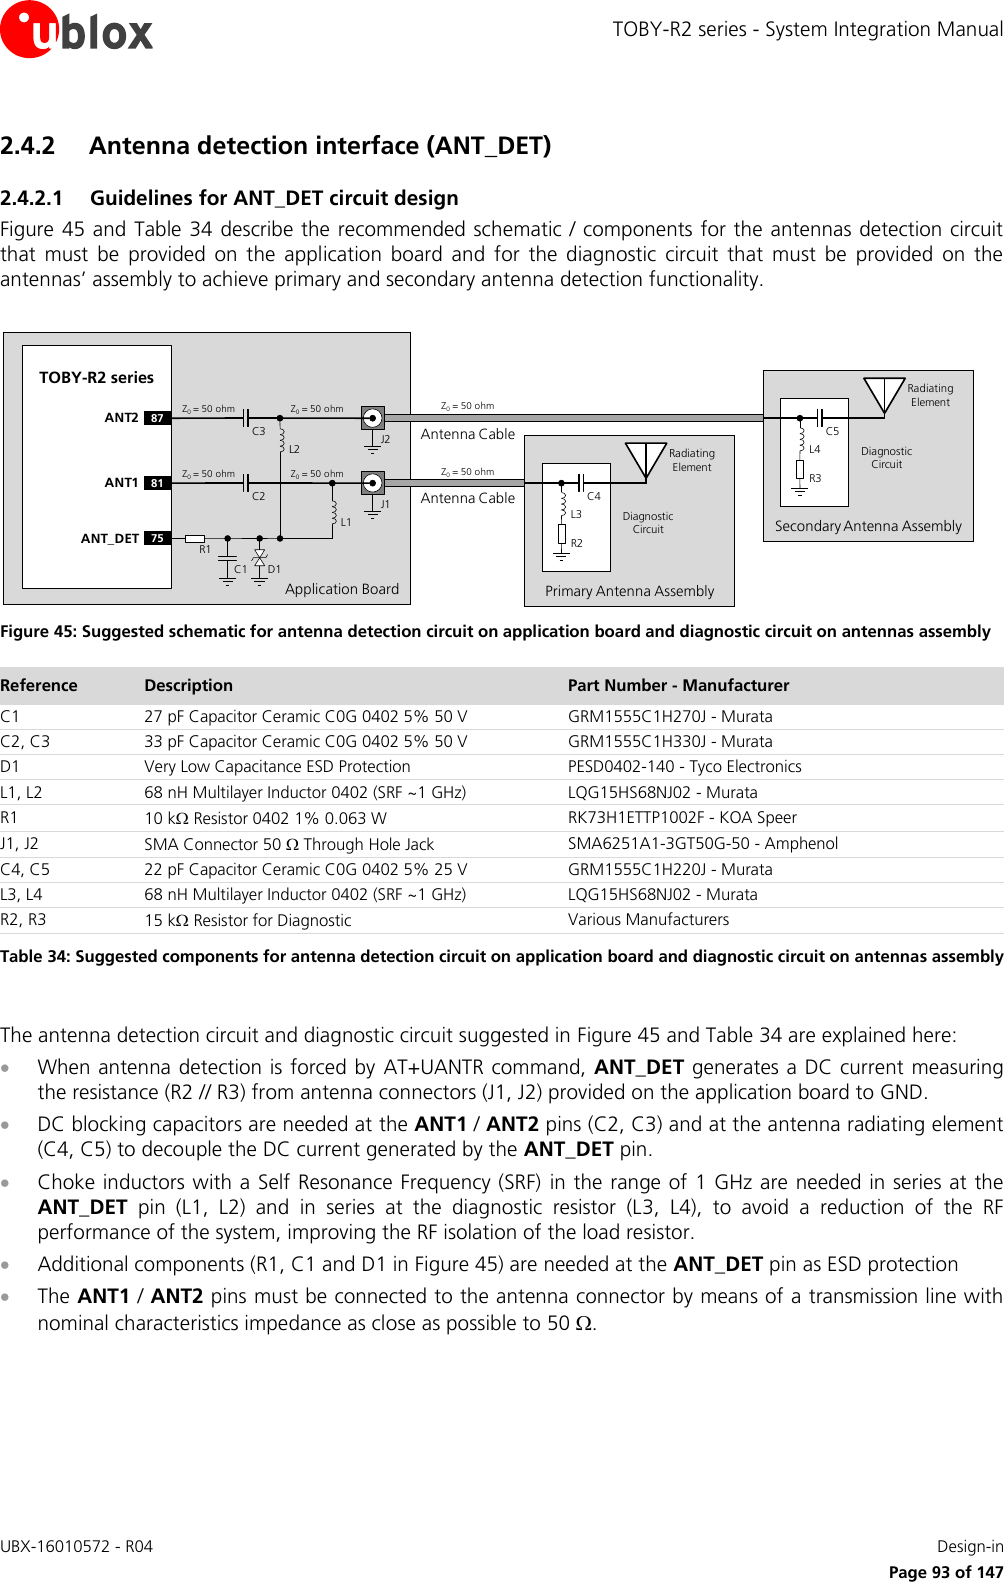 TOBY-R2 series - System Integration Manual UBX-16010572 - R04    Design-in     Page 93 of 147 2.4.2 Antenna detection interface (ANT_DET) 2.4.2.1 Guidelines for ANT_DET circuit design Figure 45 and Table 34 describe the recommended schematic / components for the antennas detection circuit that  must  be  provided  on  the  application  board  and  for  the  diagnostic  circuit  that  must  be  provided  on  the antennas’ assembly to achieve primary and secondary antenna detection functionality.  Application BoardAntenna CableTOBY-R2 series81ANT175ANT_DET R1C1 D1C2 J1Z0= 50 ohm Z0= 50 ohm Z0= 50 ohmPrimary Antenna AssemblyR2C4L3Radiating ElementDiagnostic CircuitL2L1Antenna Cable87ANT2C3 J2Z0= 50 ohm Z0= 50 ohm Z0= 50 ohmSecondary Antenna AssemblyR3C5L4Radiating ElementDiagnostic Circuit Figure 45: Suggested schematic for antenna detection circuit on application board and diagnostic circuit on antennas assembly Reference Description Part Number - Manufacturer C1 27 pF Capacitor Ceramic C0G 0402 5% 50 V GRM1555C1H270J - Murata C2, C3 33 pF Capacitor Ceramic C0G 0402 5% 50 V GRM1555C1H330J - Murata D1 Very Low Capacitance ESD Protection PESD0402-140 - Tyco Electronics L1, L2 68 nH Multilayer Inductor 0402 (SRF ~1 GHz) LQG15HS68NJ02 - Murata R1 10 k Resistor 0402 1% 0.063 W RK73H1ETTP1002F - KOA Speer J1, J2 SMA Connector 50  Through Hole Jack SMA6251A1-3GT50G-50 - Amphenol C4, C5 22 pF Capacitor Ceramic C0G 0402 5% 25 V  GRM1555C1H220J - Murata L3, L4 68 nH Multilayer Inductor 0402 (SRF ~1 GHz) LQG15HS68NJ02 - Murata R2, R3 15 k Resistor for Diagnostic Various Manufacturers Table 34: Suggested components for antenna detection circuit on application board and diagnostic circuit on antennas assembly  The antenna detection circuit and diagnostic circuit suggested in Figure 45 and Table 34 are explained here:  When antenna detection is forced by AT+UANTR command, ANT_DET generates a DC current measuring the resistance (R2 // R3) from antenna connectors (J1, J2) provided on the application board to GND.  DC blocking capacitors are needed at the ANT1 / ANT2 pins (C2, C3) and at the antenna radiating element (C4, C5) to decouple the DC current generated by the ANT_DET pin.  Choke inductors with a Self Resonance Frequency (SRF) in the range of 1 GHz are needed in series at the ANT_DET  pin  (L1,  L2)  and  in  series  at  the  diagnostic  resistor  (L3,  L4),  to  avoid  a  reduction  of  the  RF performance of the system, improving the RF isolation of the load resistor.   Additional components (R1, C1 and D1 in Figure 45) are needed at the ANT_DET pin as ESD protection  The ANT1 / ANT2 pins must be connected to the antenna connector by means of a transmission line with nominal characteristics impedance as close as possible to 50 .  